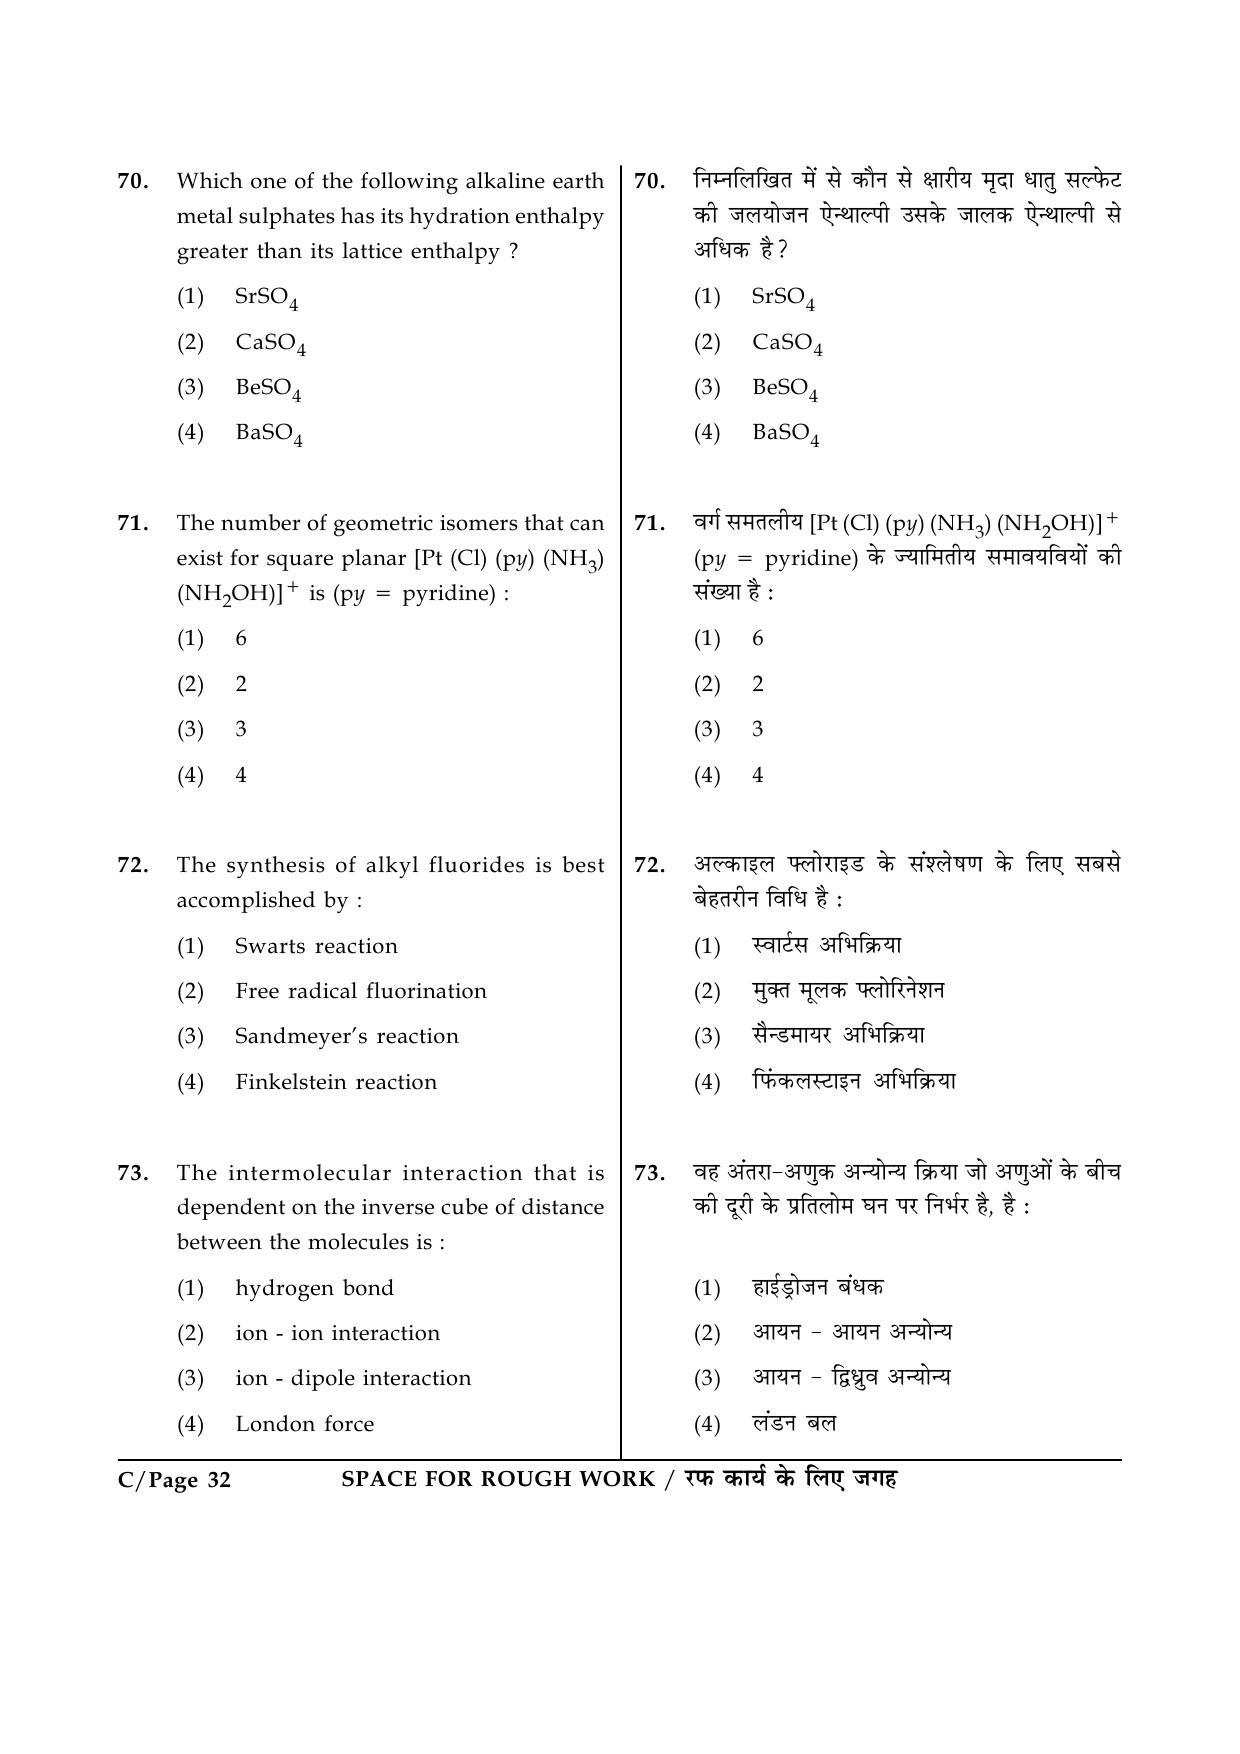 JEE Main Exam Question Paper 2015 Booklet C 32